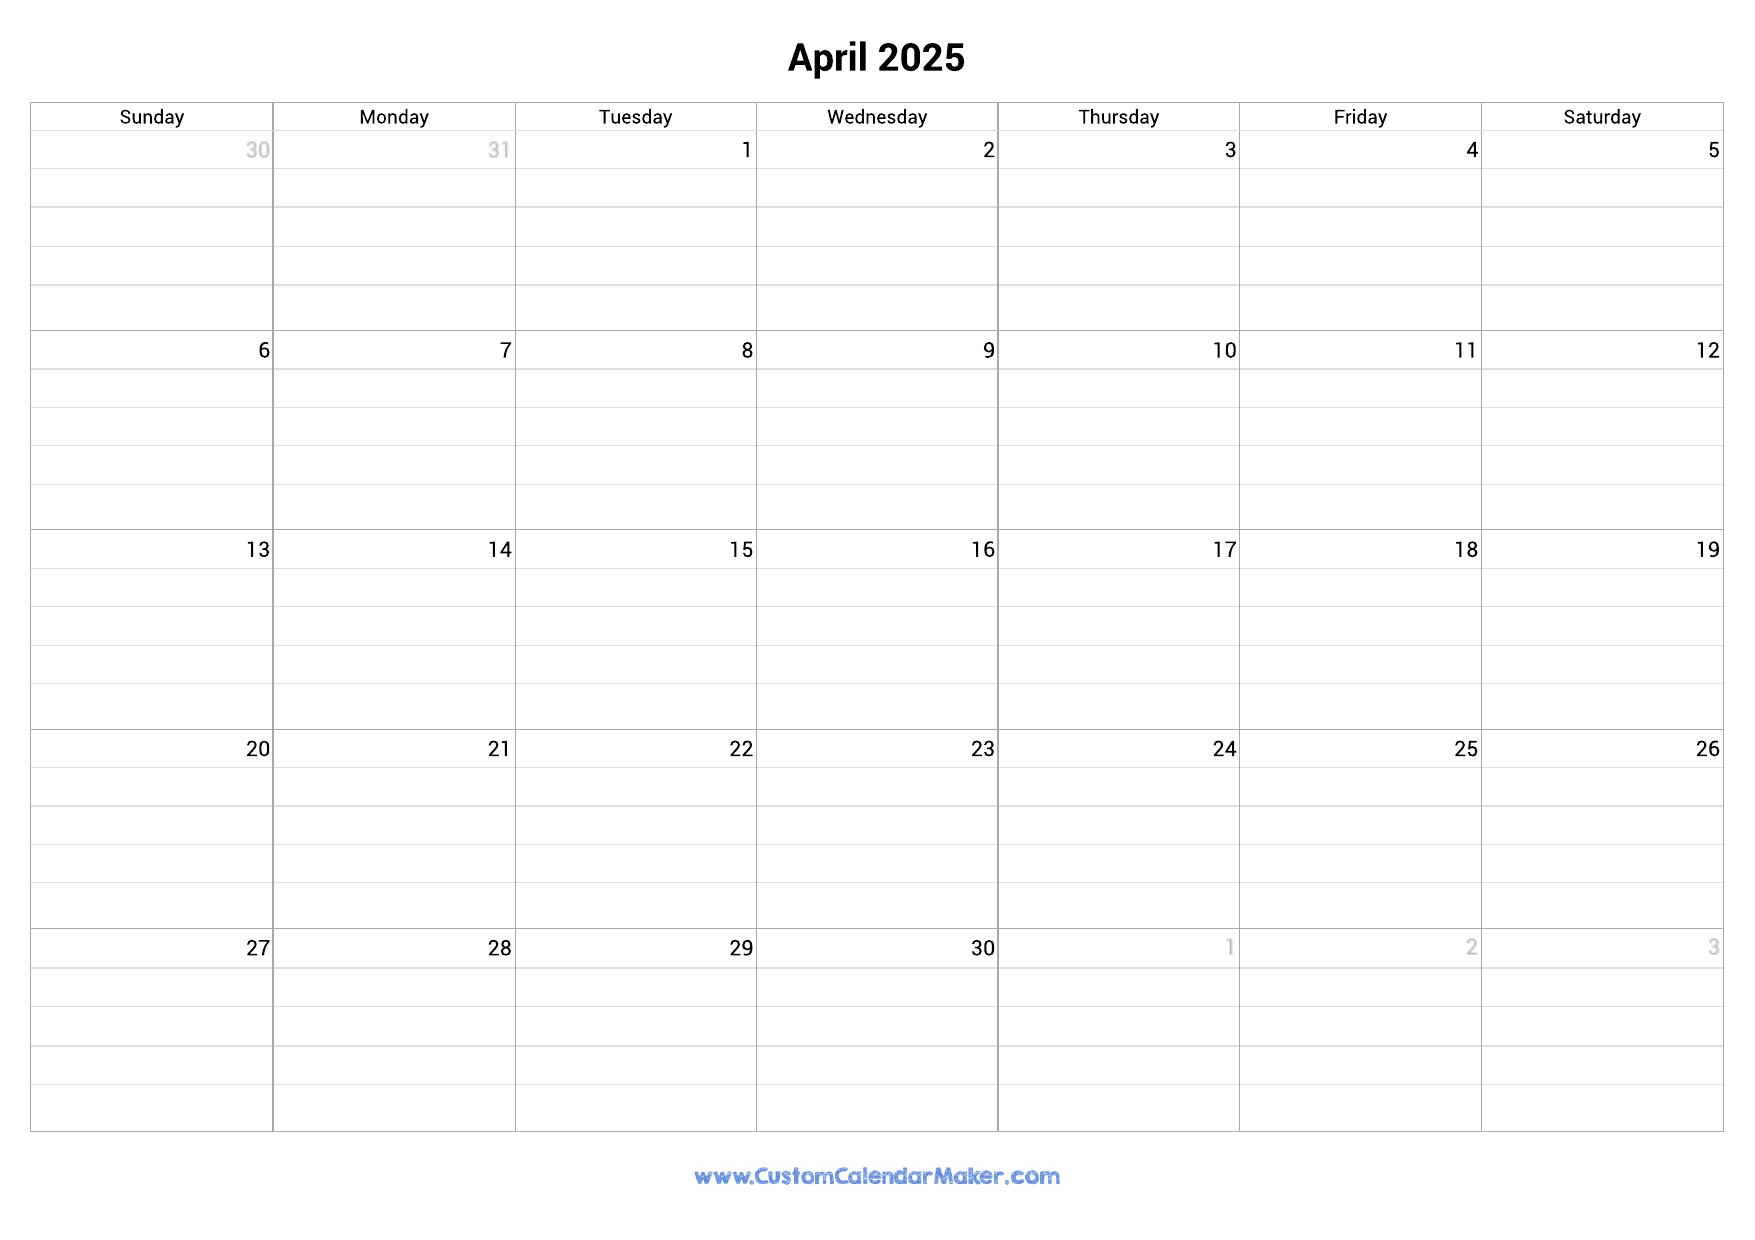 April 2025 Fillable Calendar Grid With Lines